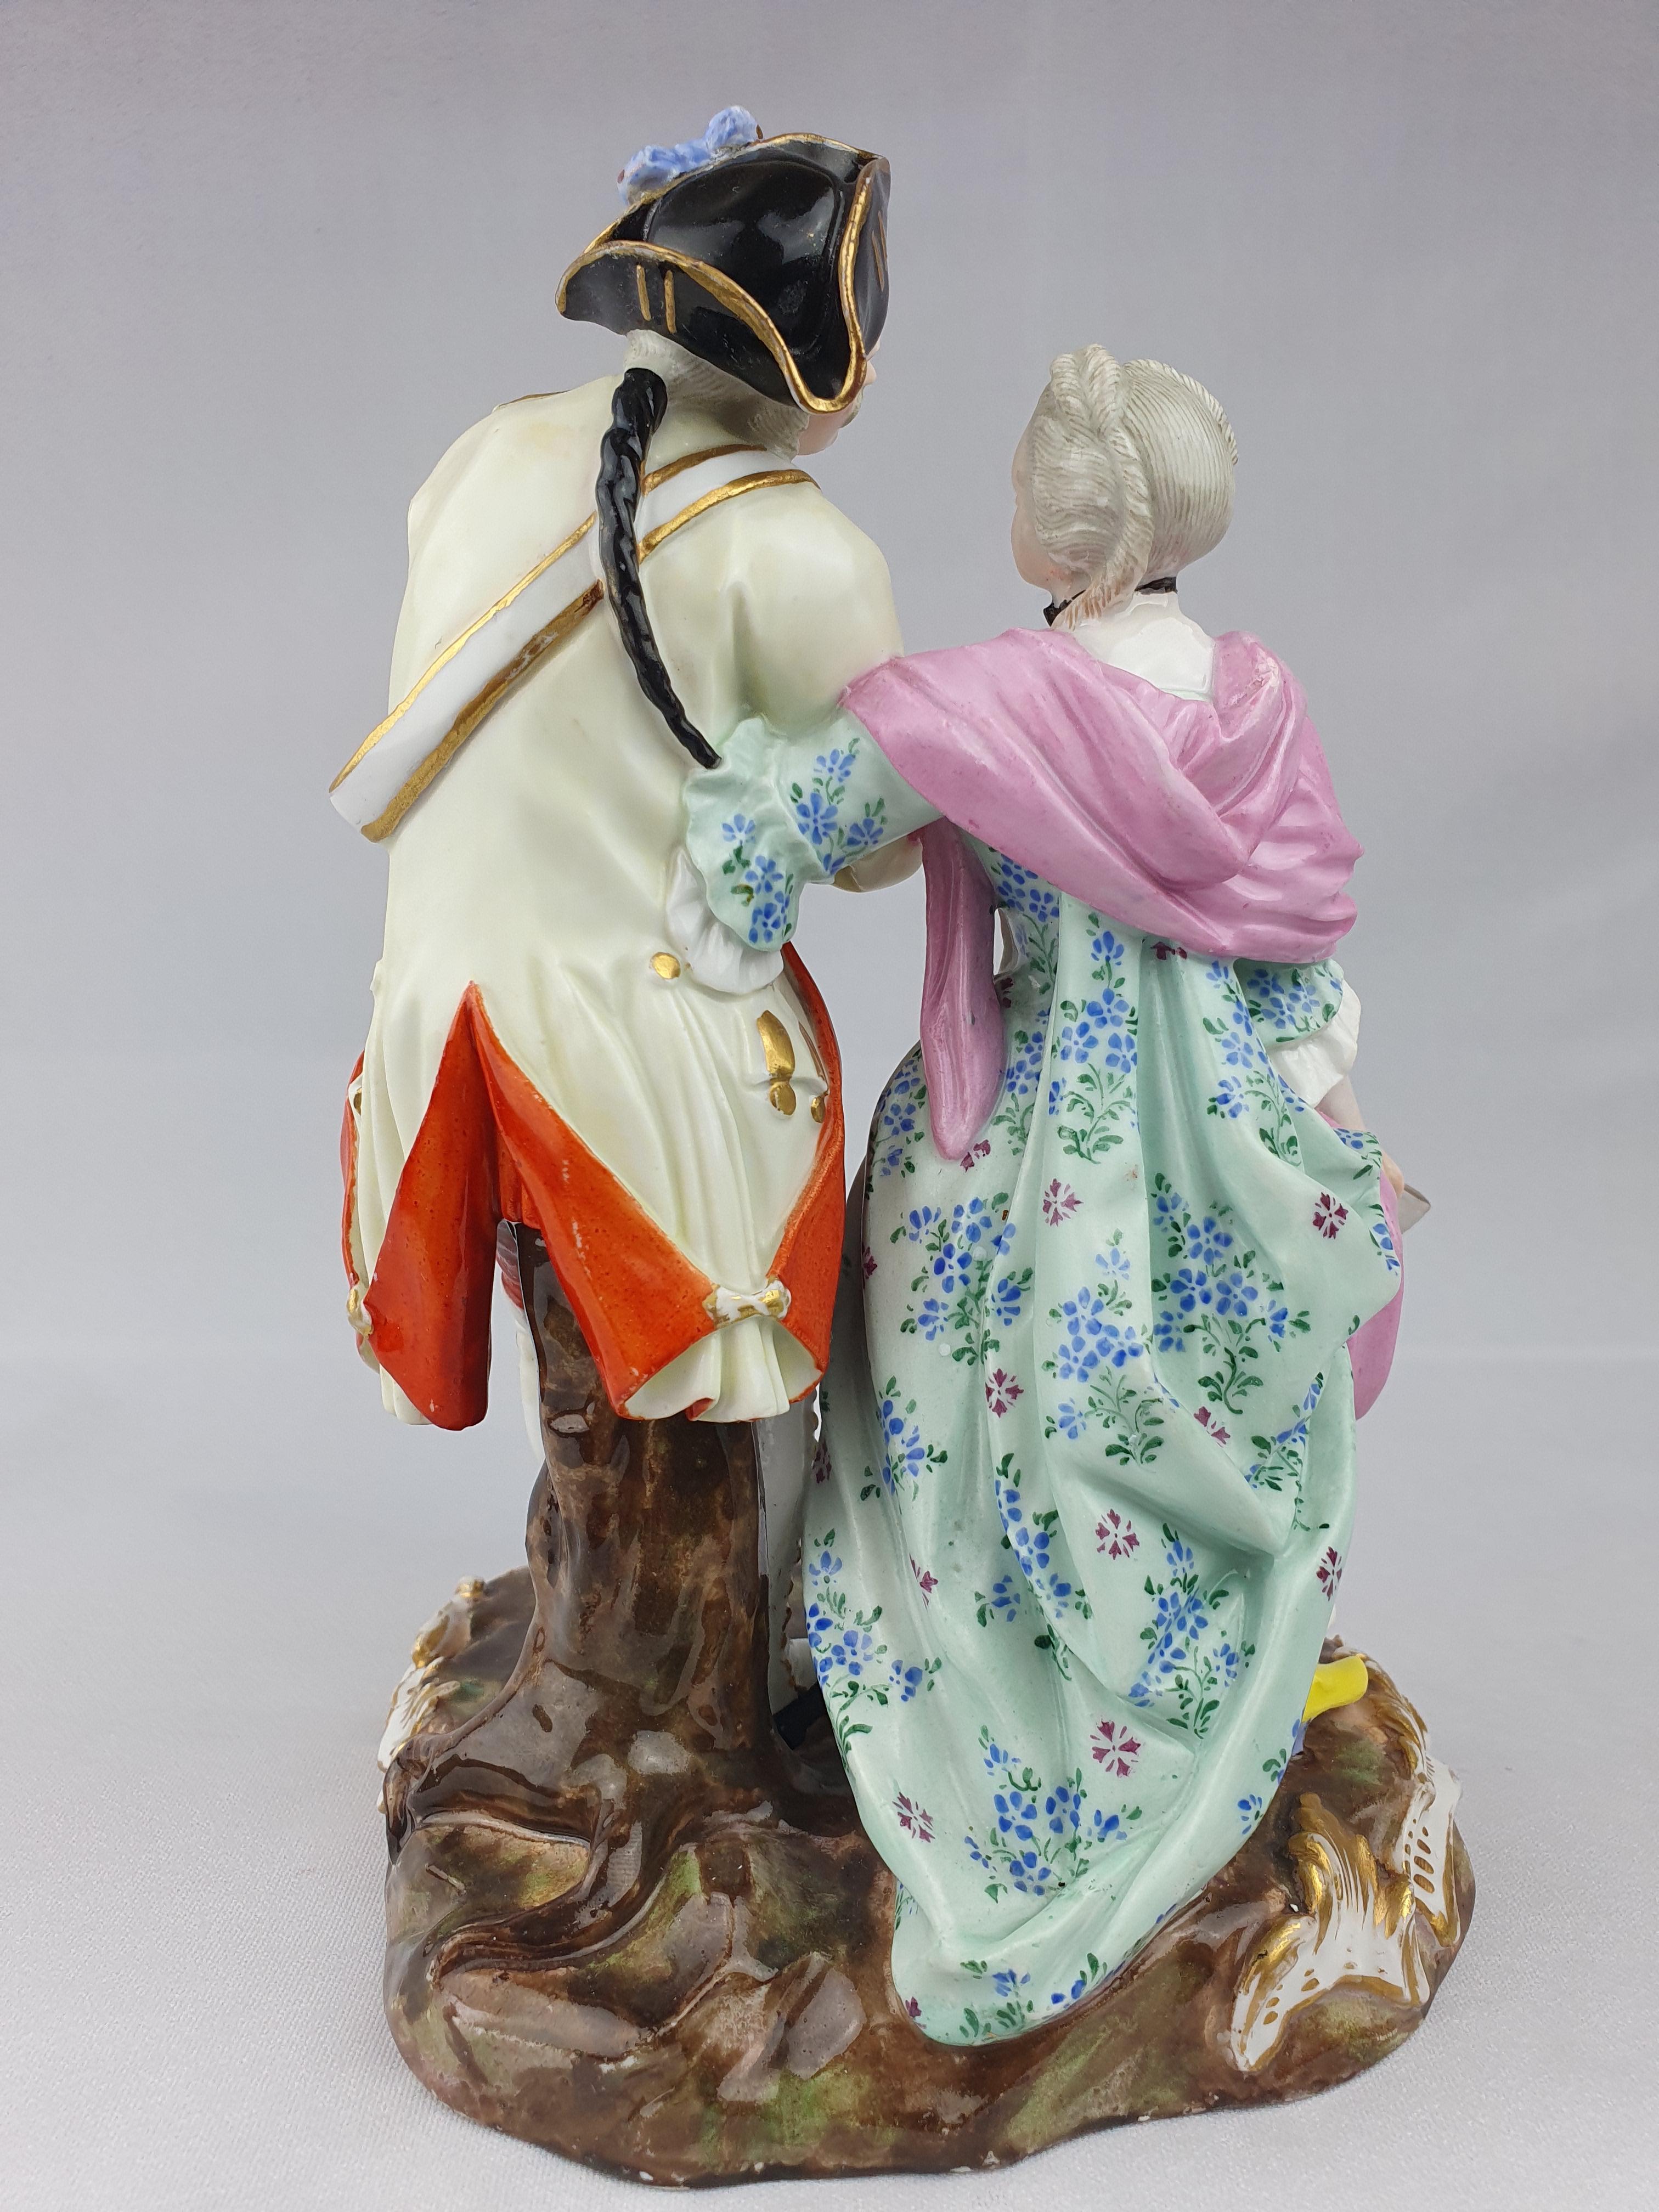 Meissen Loving Group of Soldier and Companion modelled by Schoenheit

Inscribed E13
Height 19cm
Circa 1840.

----SHIPPING - 
Please contact us for a competitively priced shipping quote.